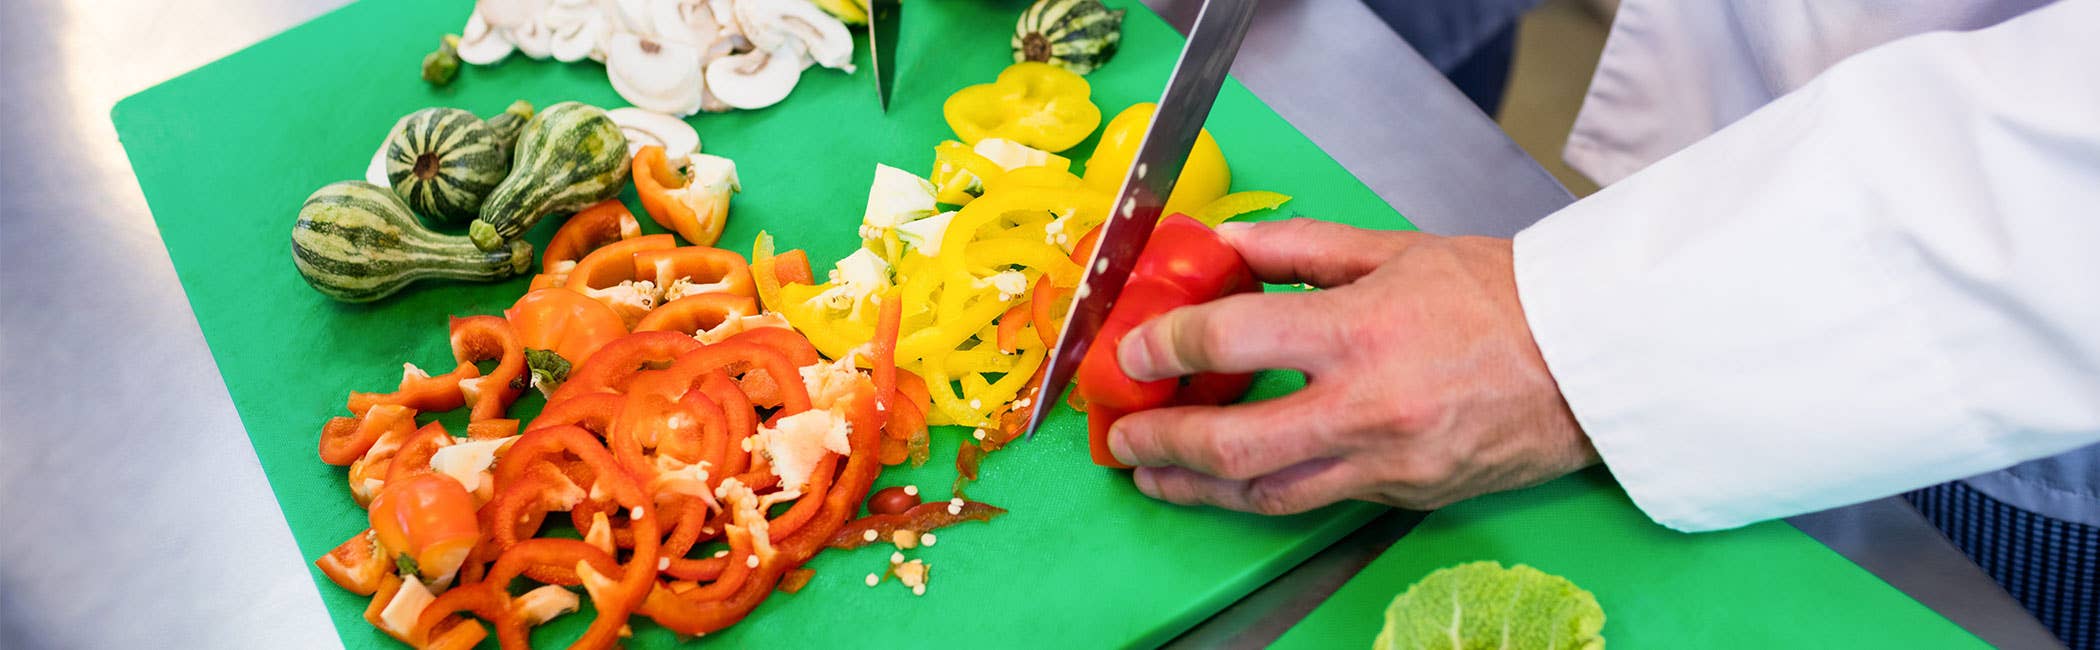 Use different cutting boards for raw meat and vegetables 